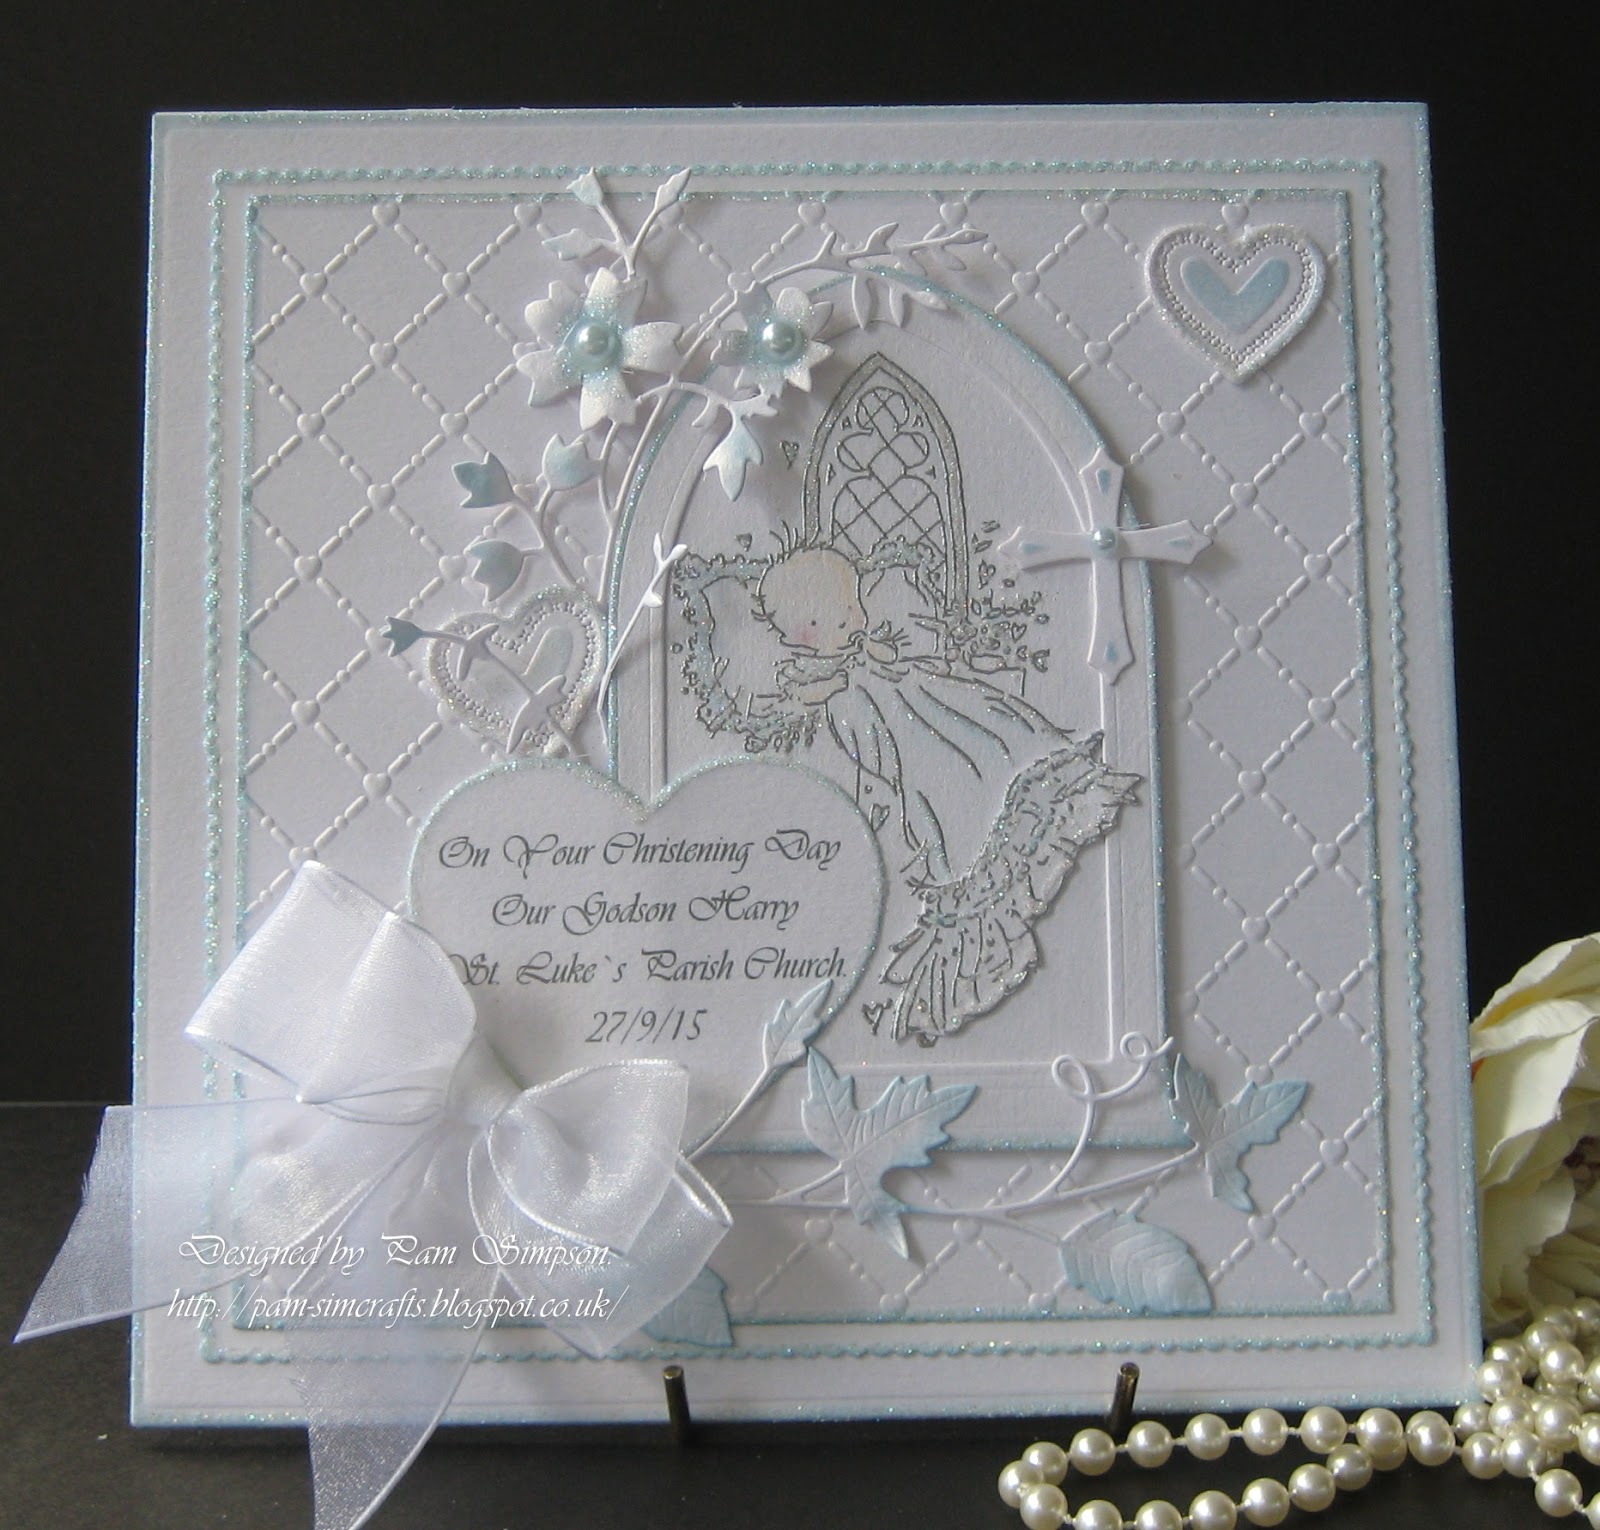 pamscrafts-two-christening-cards-from-godparents